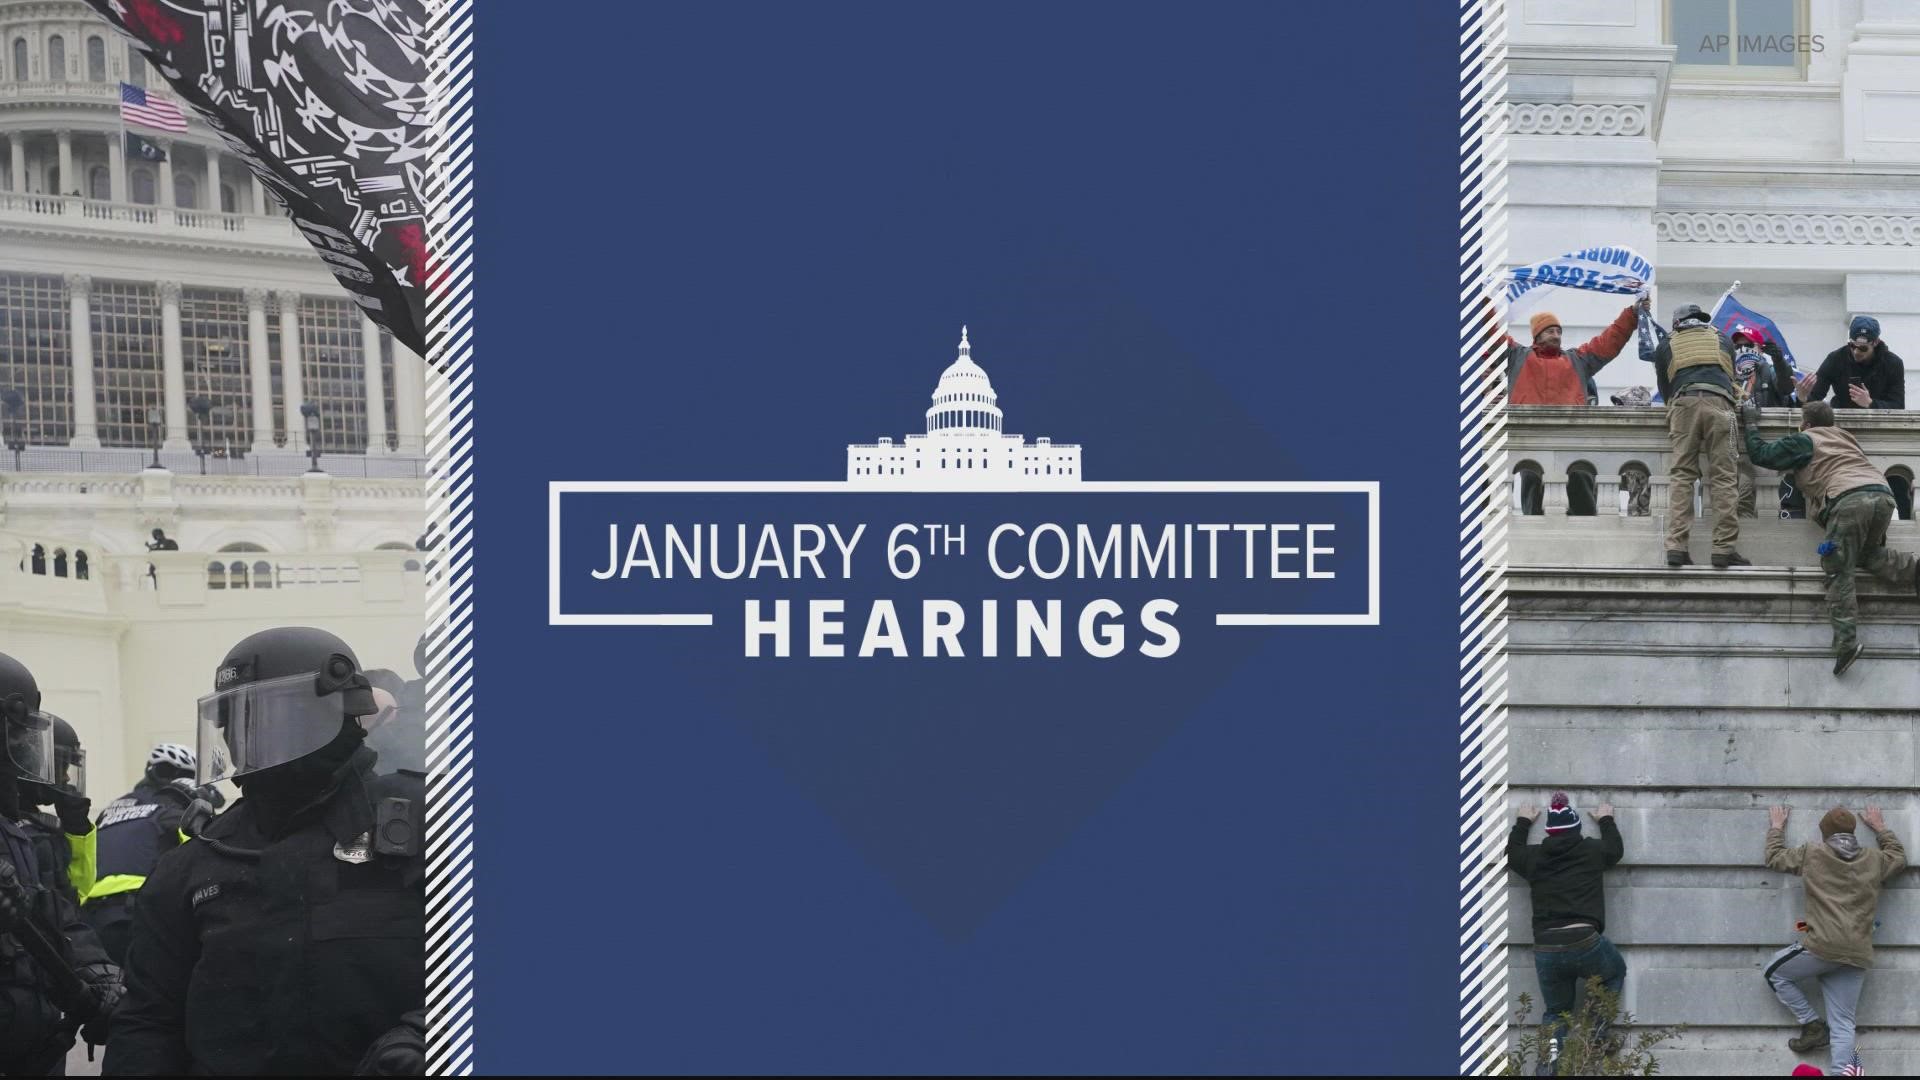 Congress has left Washington for a two-week recess, but the panel is calling a surprise hearing for Tuesday.